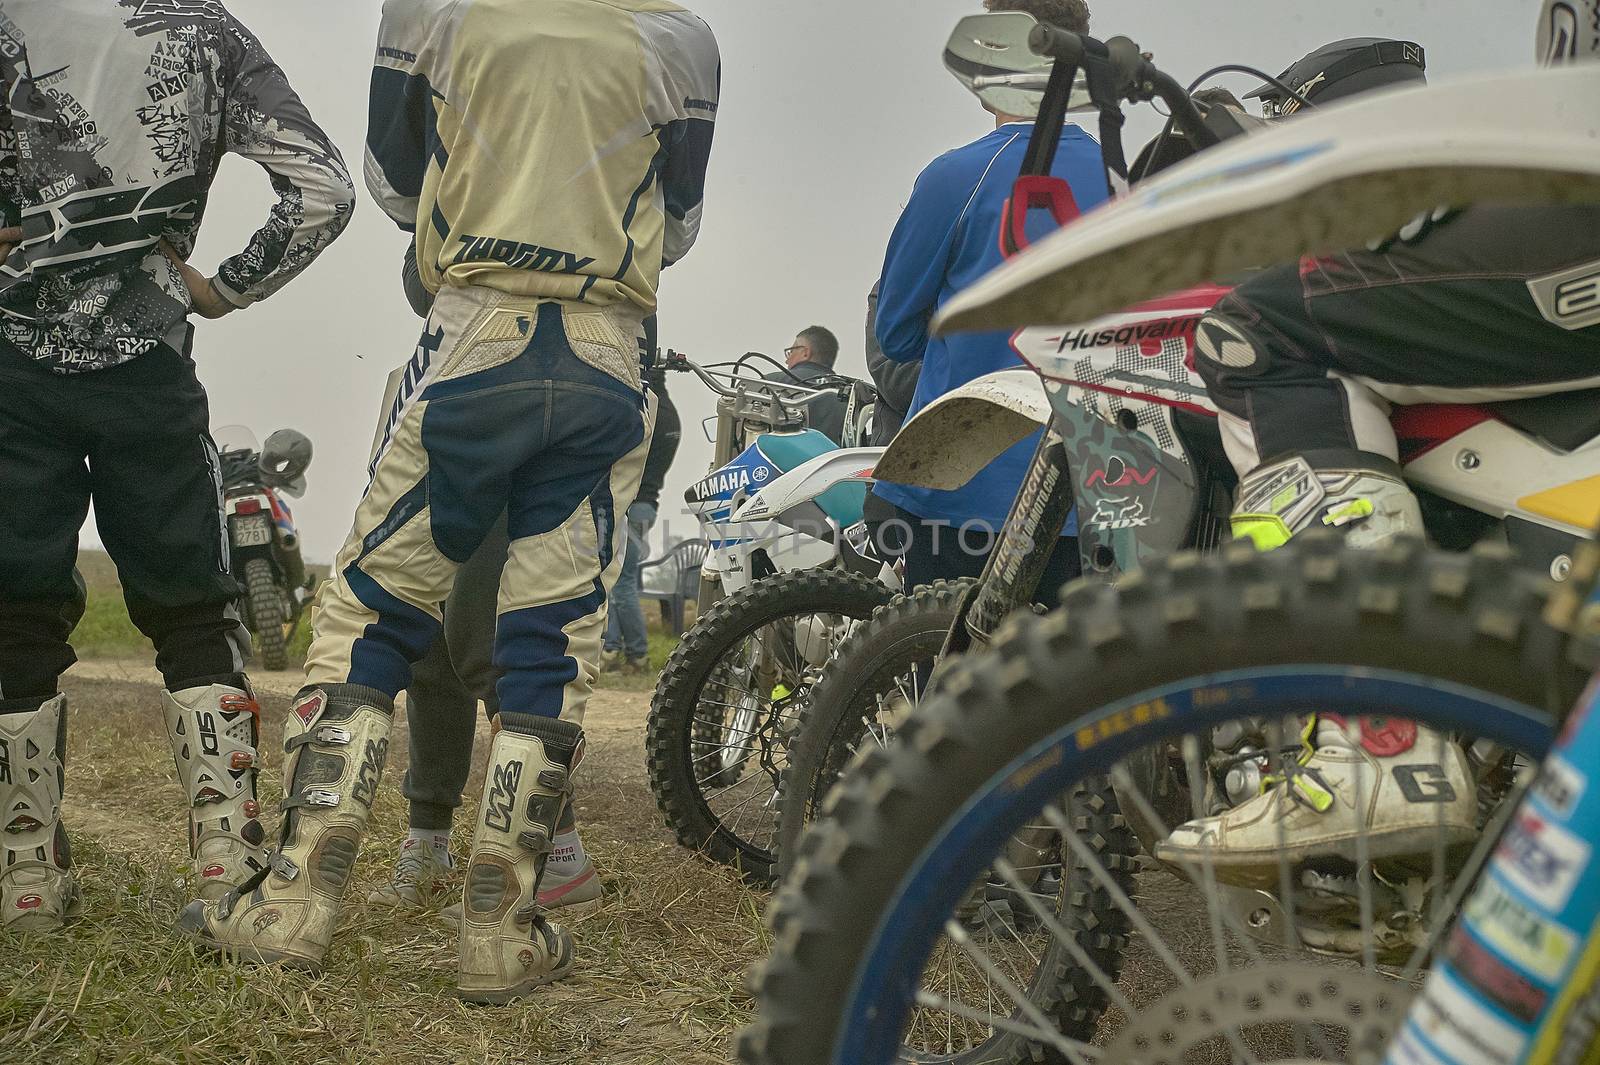 Enduro race in Countryside 2 by pippocarlot